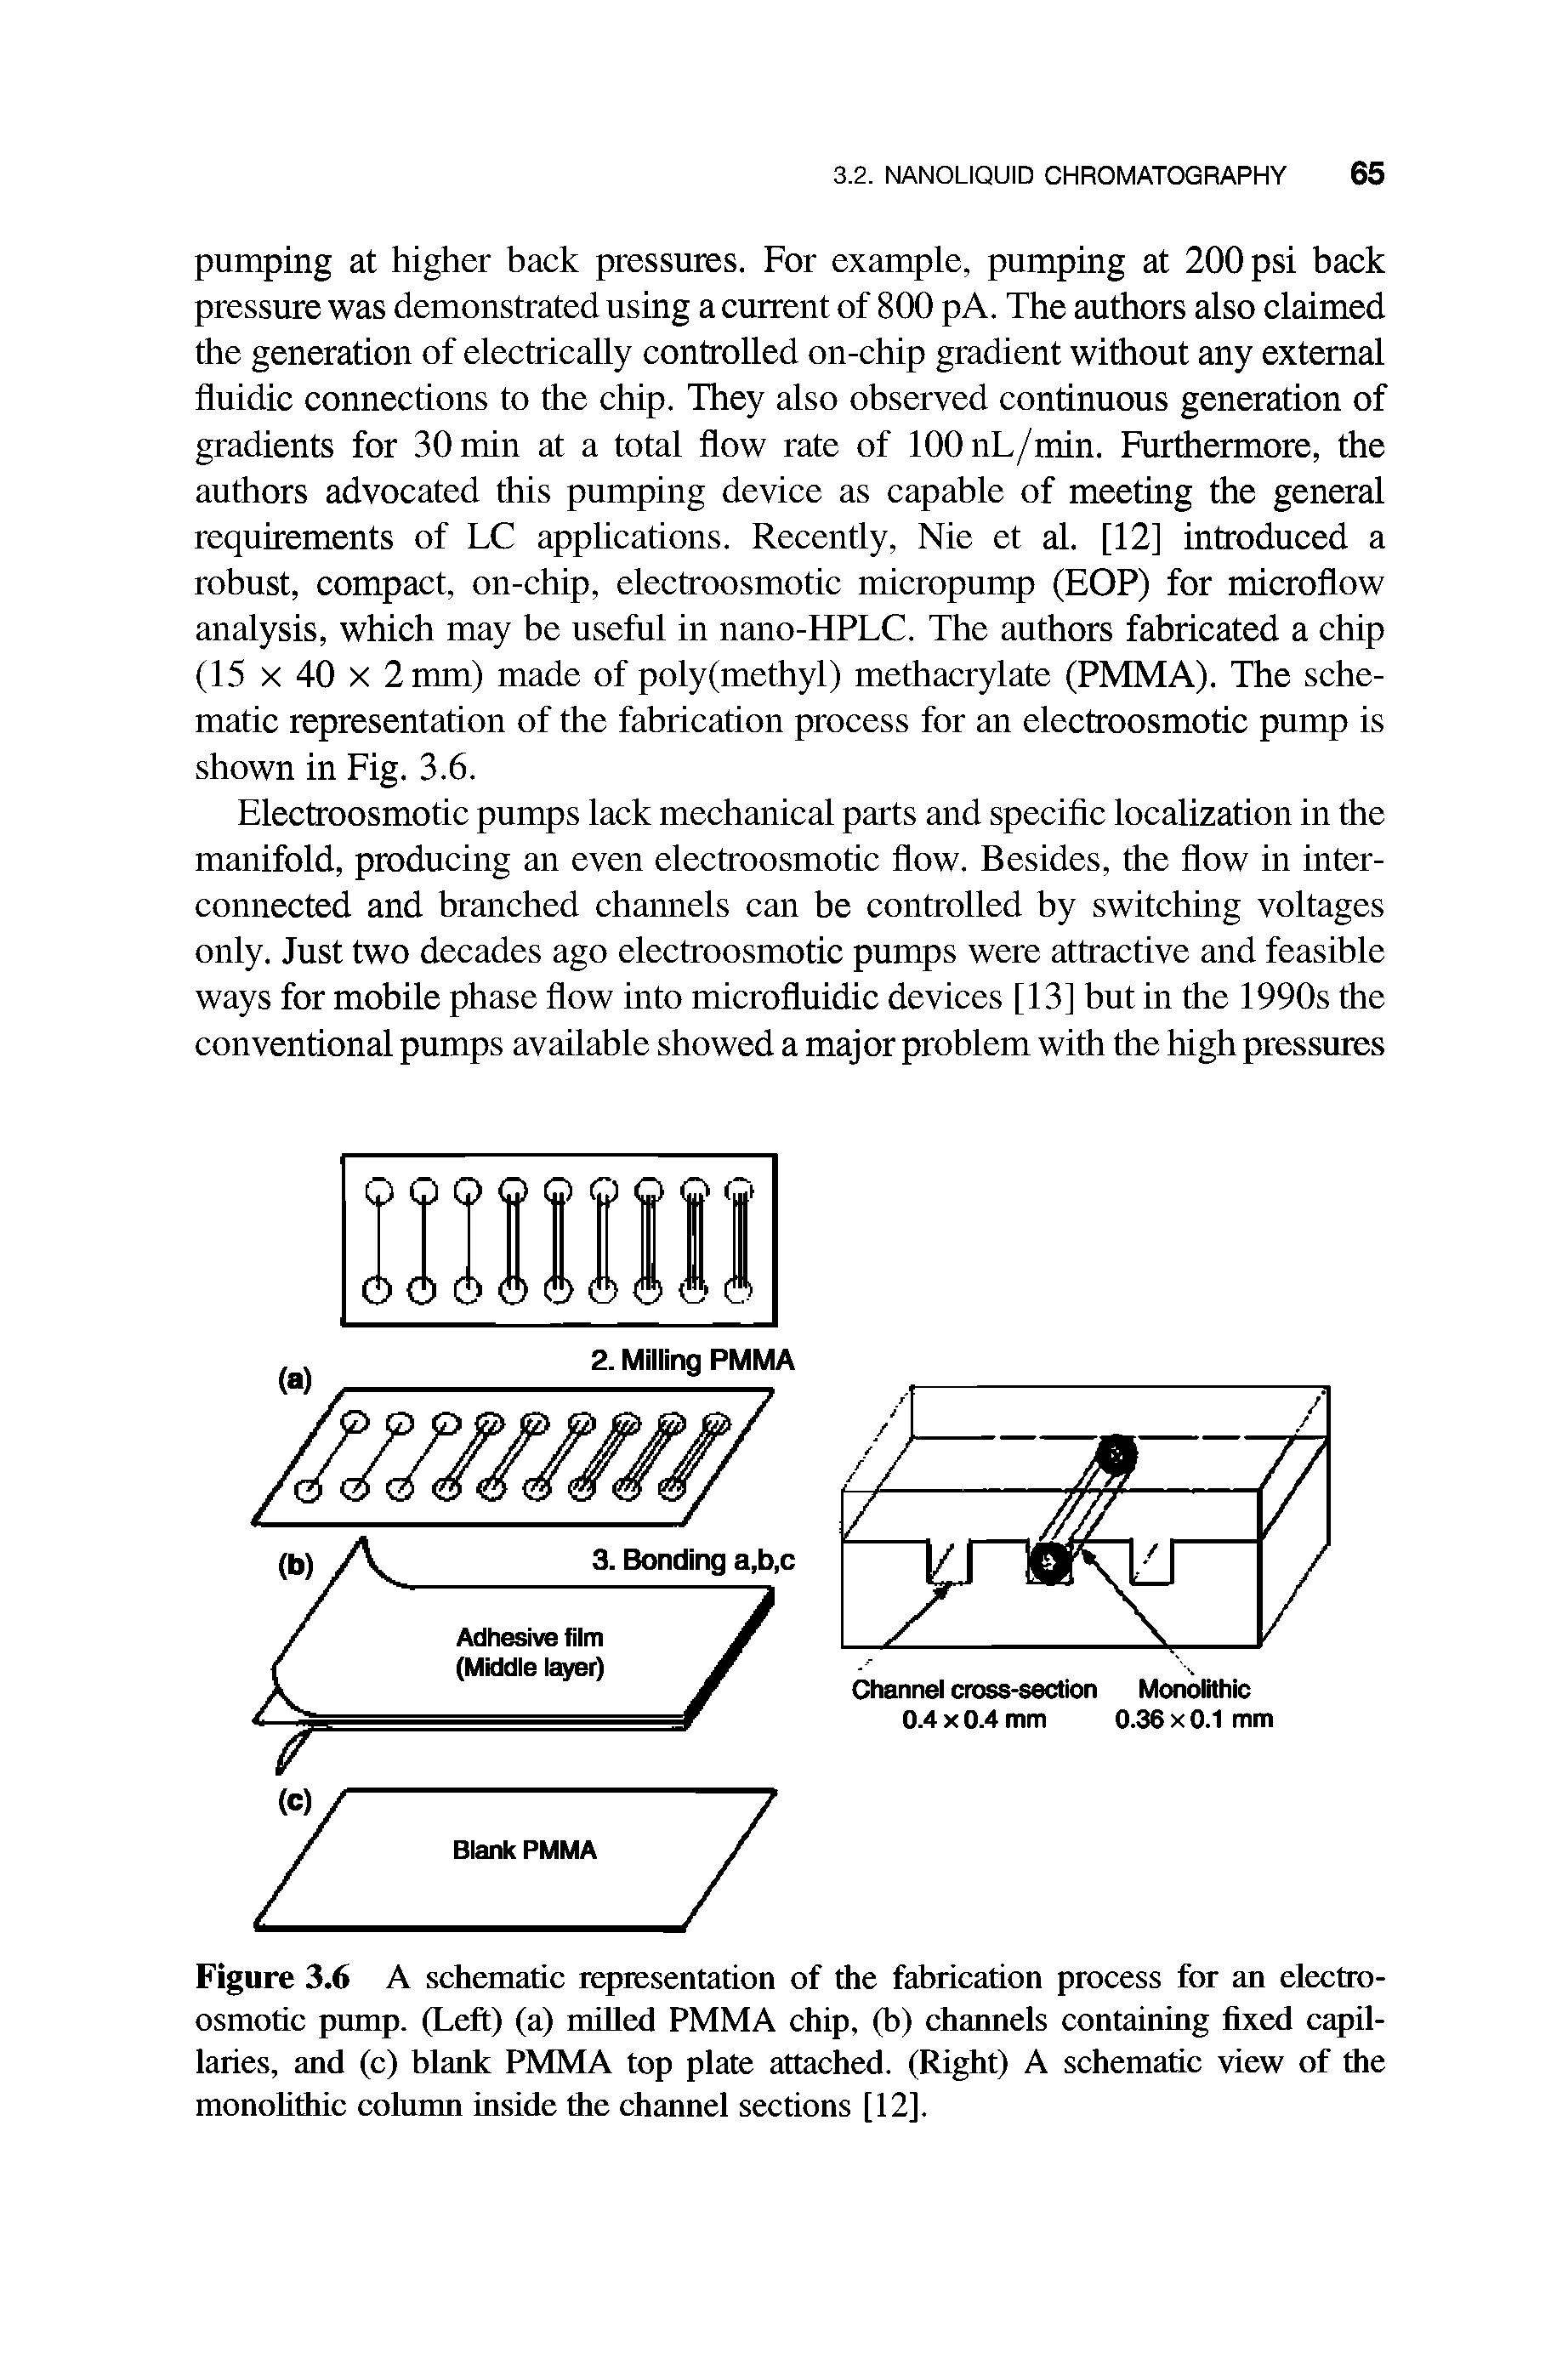 Figure 3.6 A schematic representation of the fabrication process for an electroosmotic pump. (Left) (a) milled PMMA chip, (b) channels containing fixed capillaries, and (c) blank PMMA top plate attached. (Right) A schematic view of the monolithic column inside the channel sections [12].